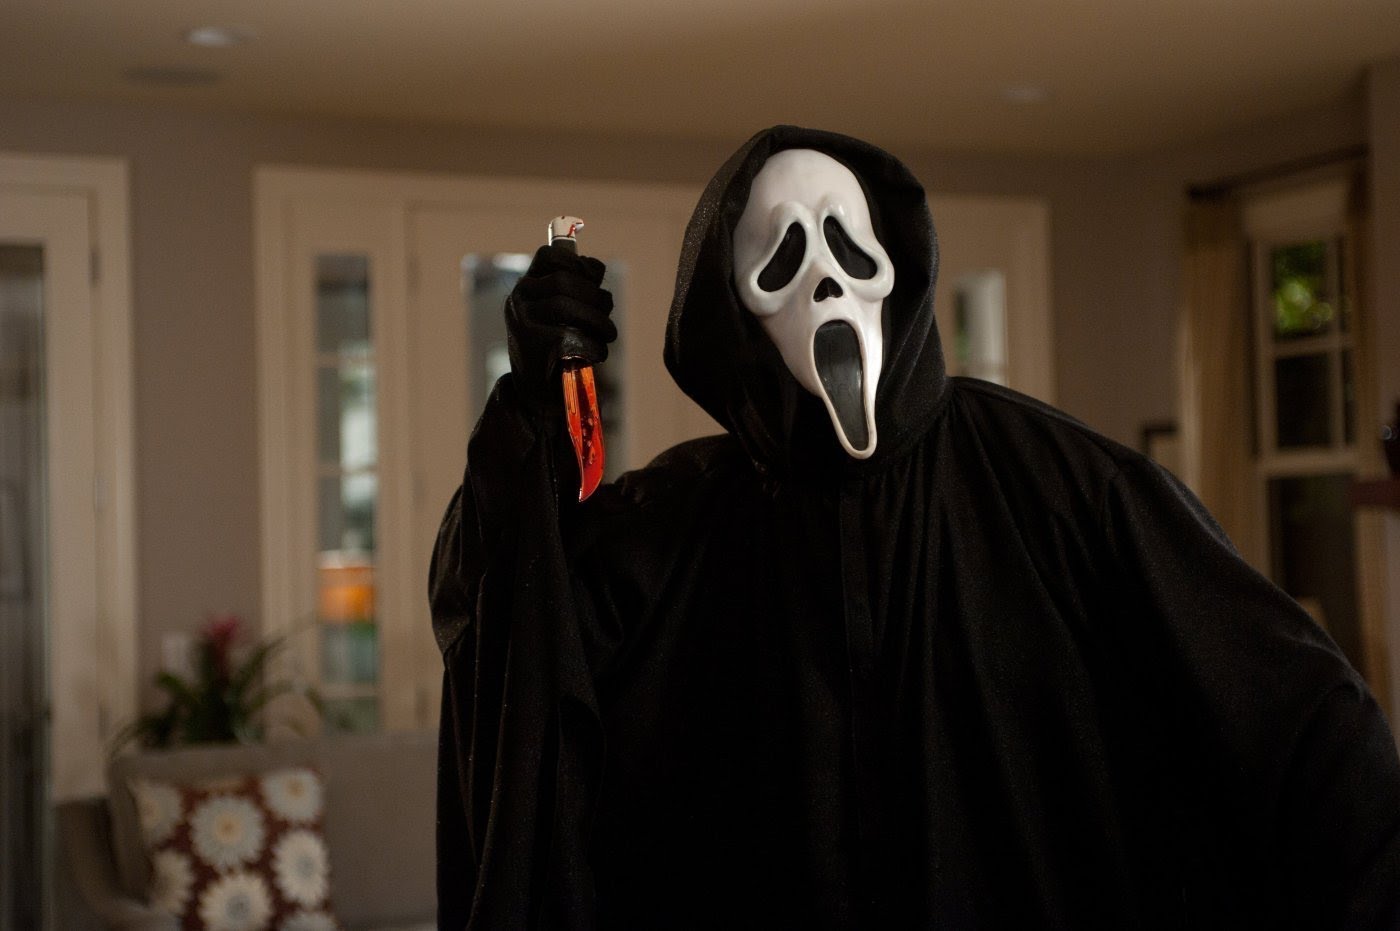 Shooting with laughter – the slasher phenomenon